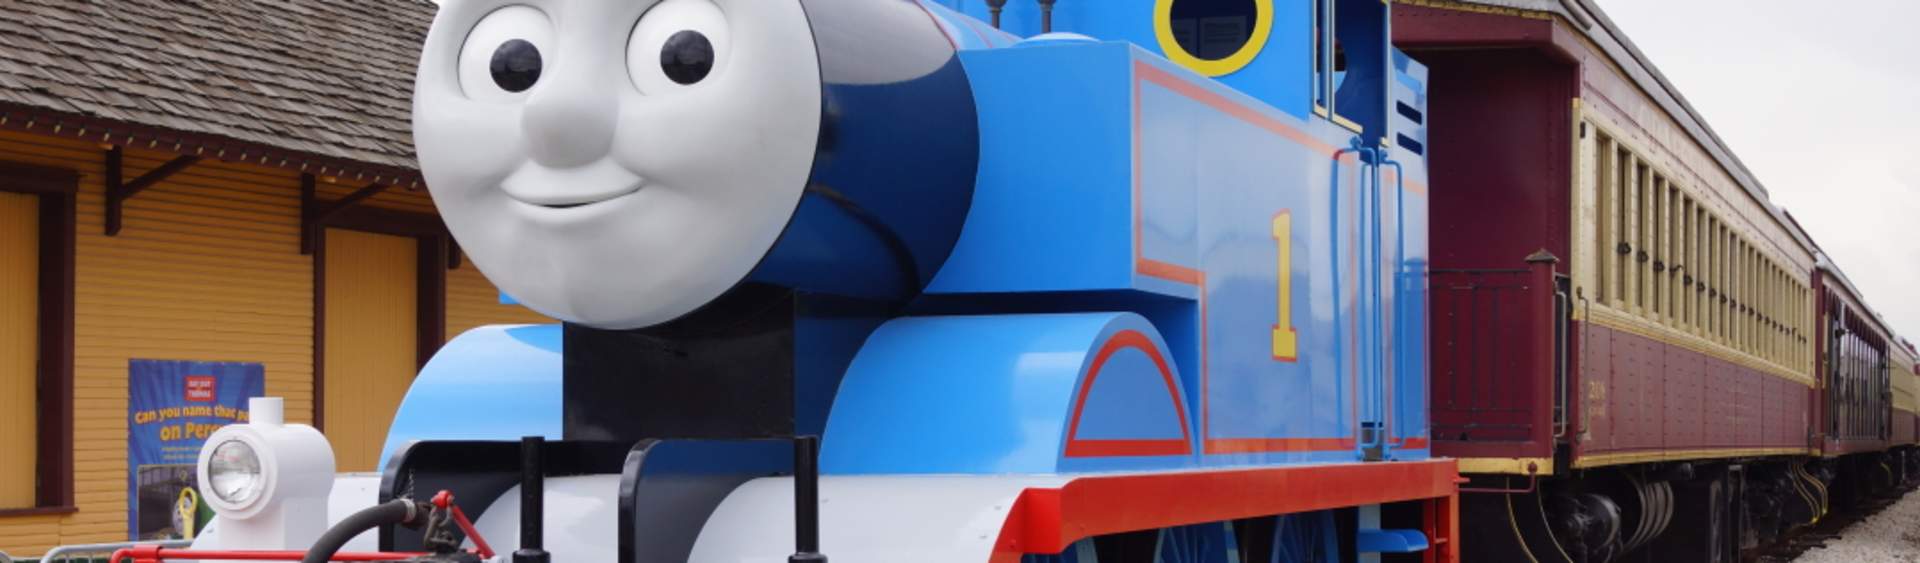 DAY OUT WITH THOMAS™ PULLS INTO GRAPEVINE VINTAGE RAILROAD